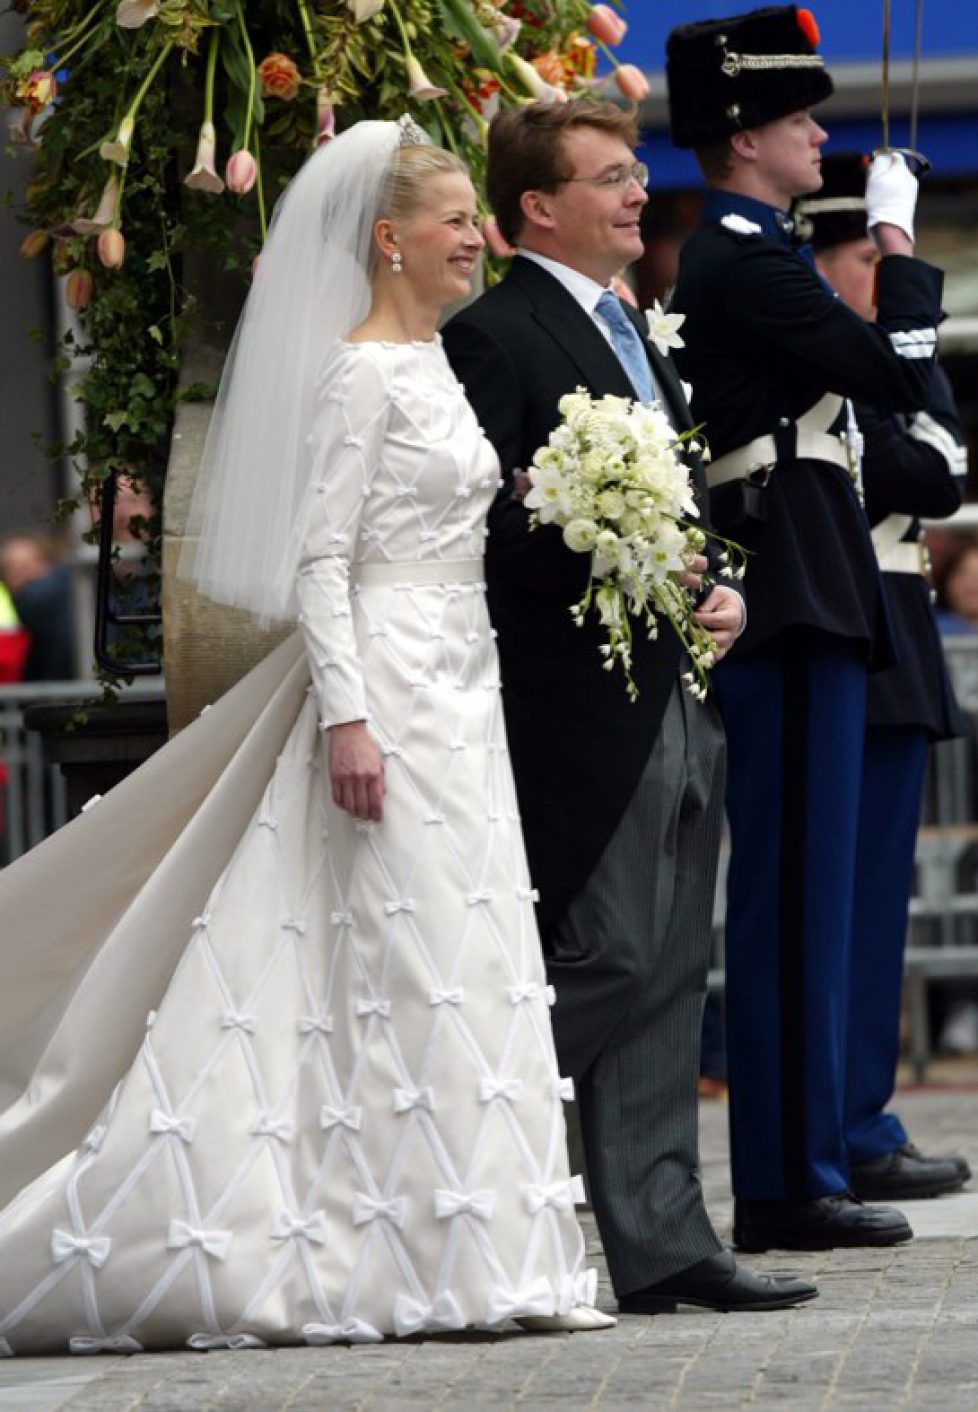 Wedding Of Prince Johan Friso and Mabel Wisse Smit